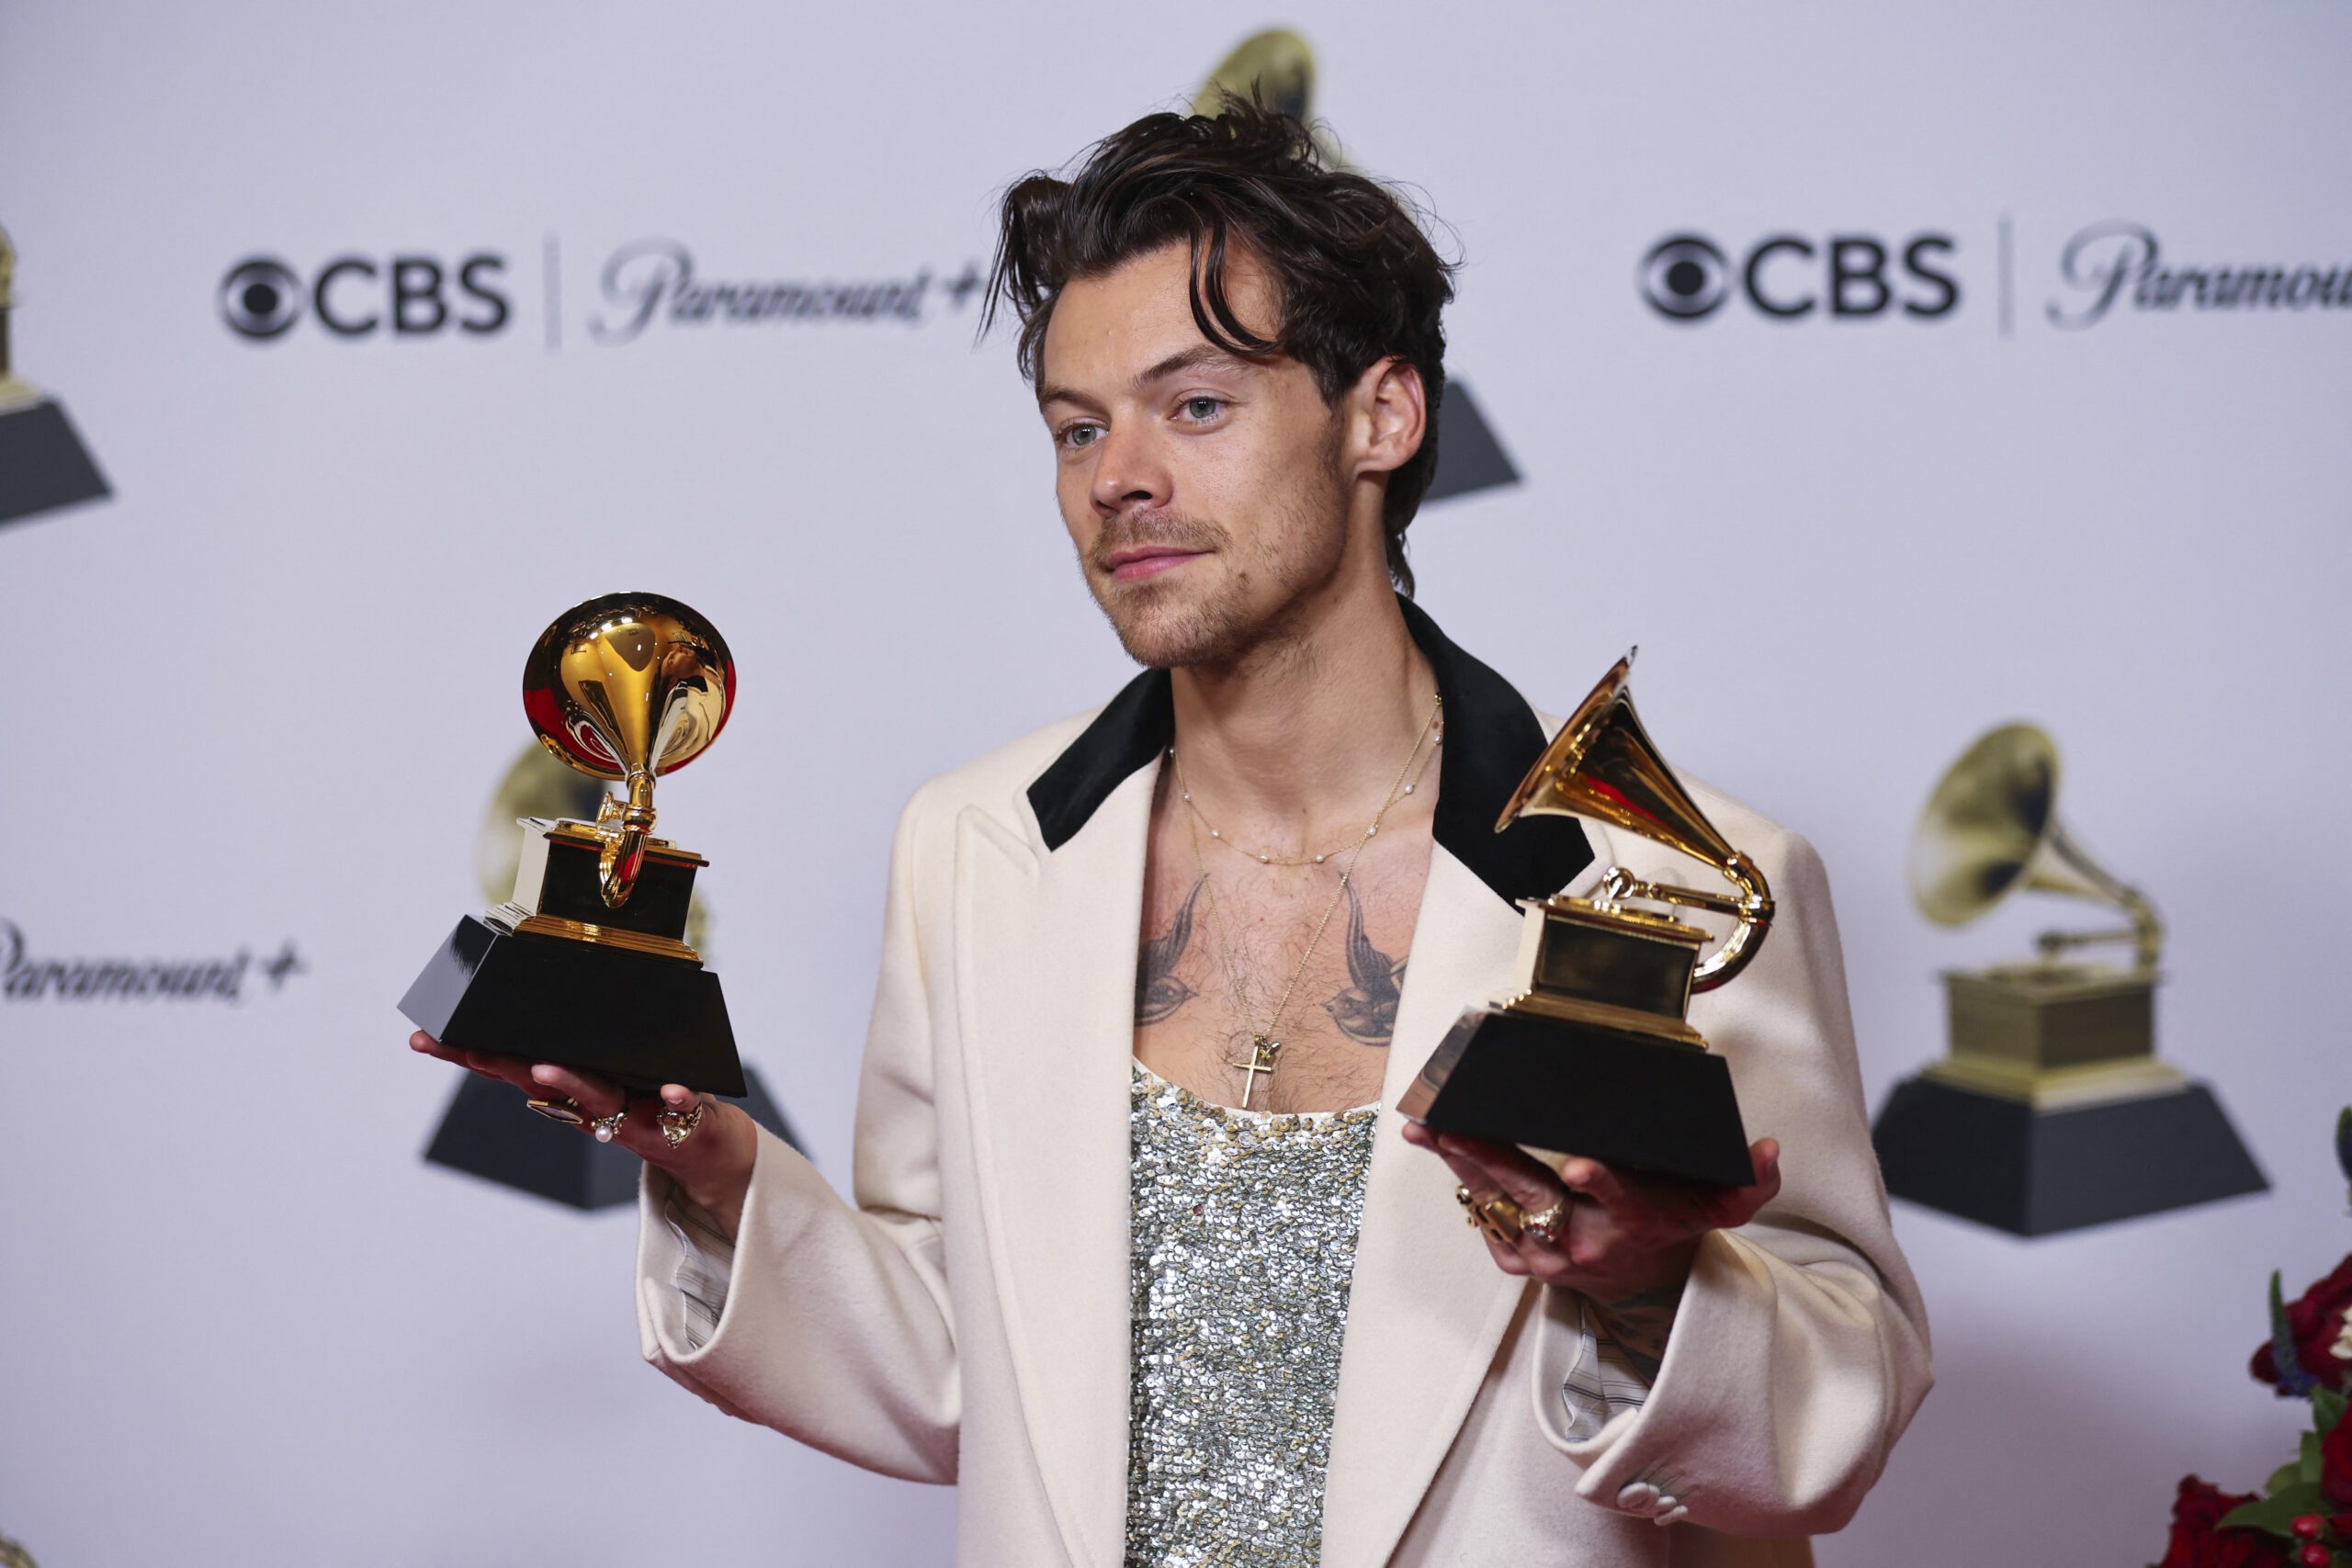 Key winners: Beyonce makes Grammys history, Harry Styles claims album prize